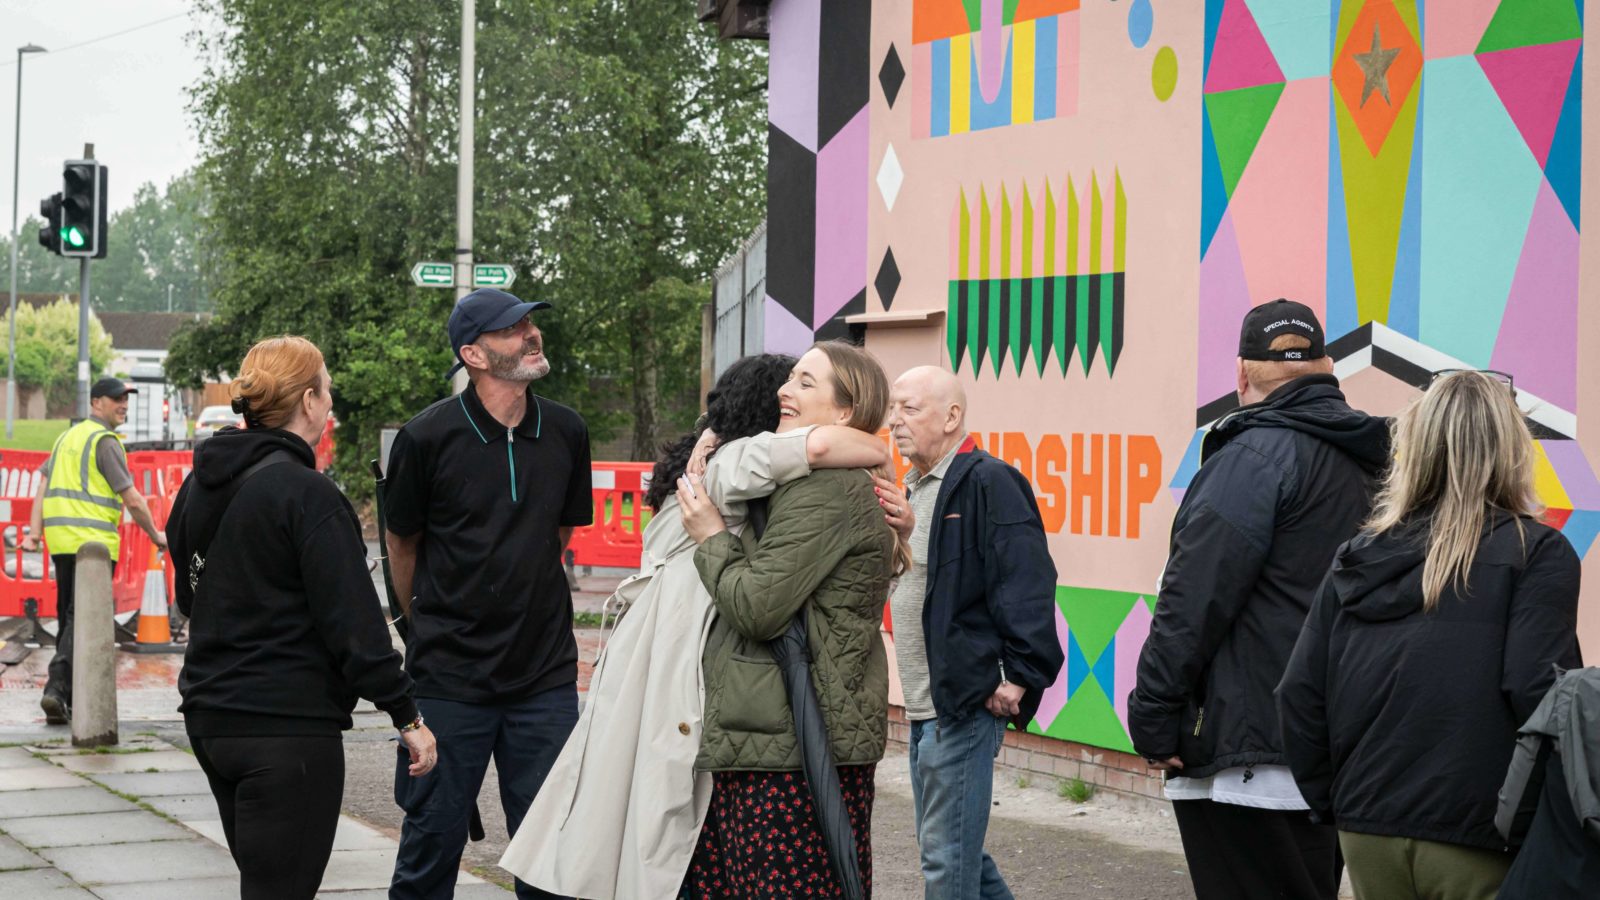 People are photographed candidly standing in front of the mural, Cherie hugs Heart of Glass producer Rhyannon.